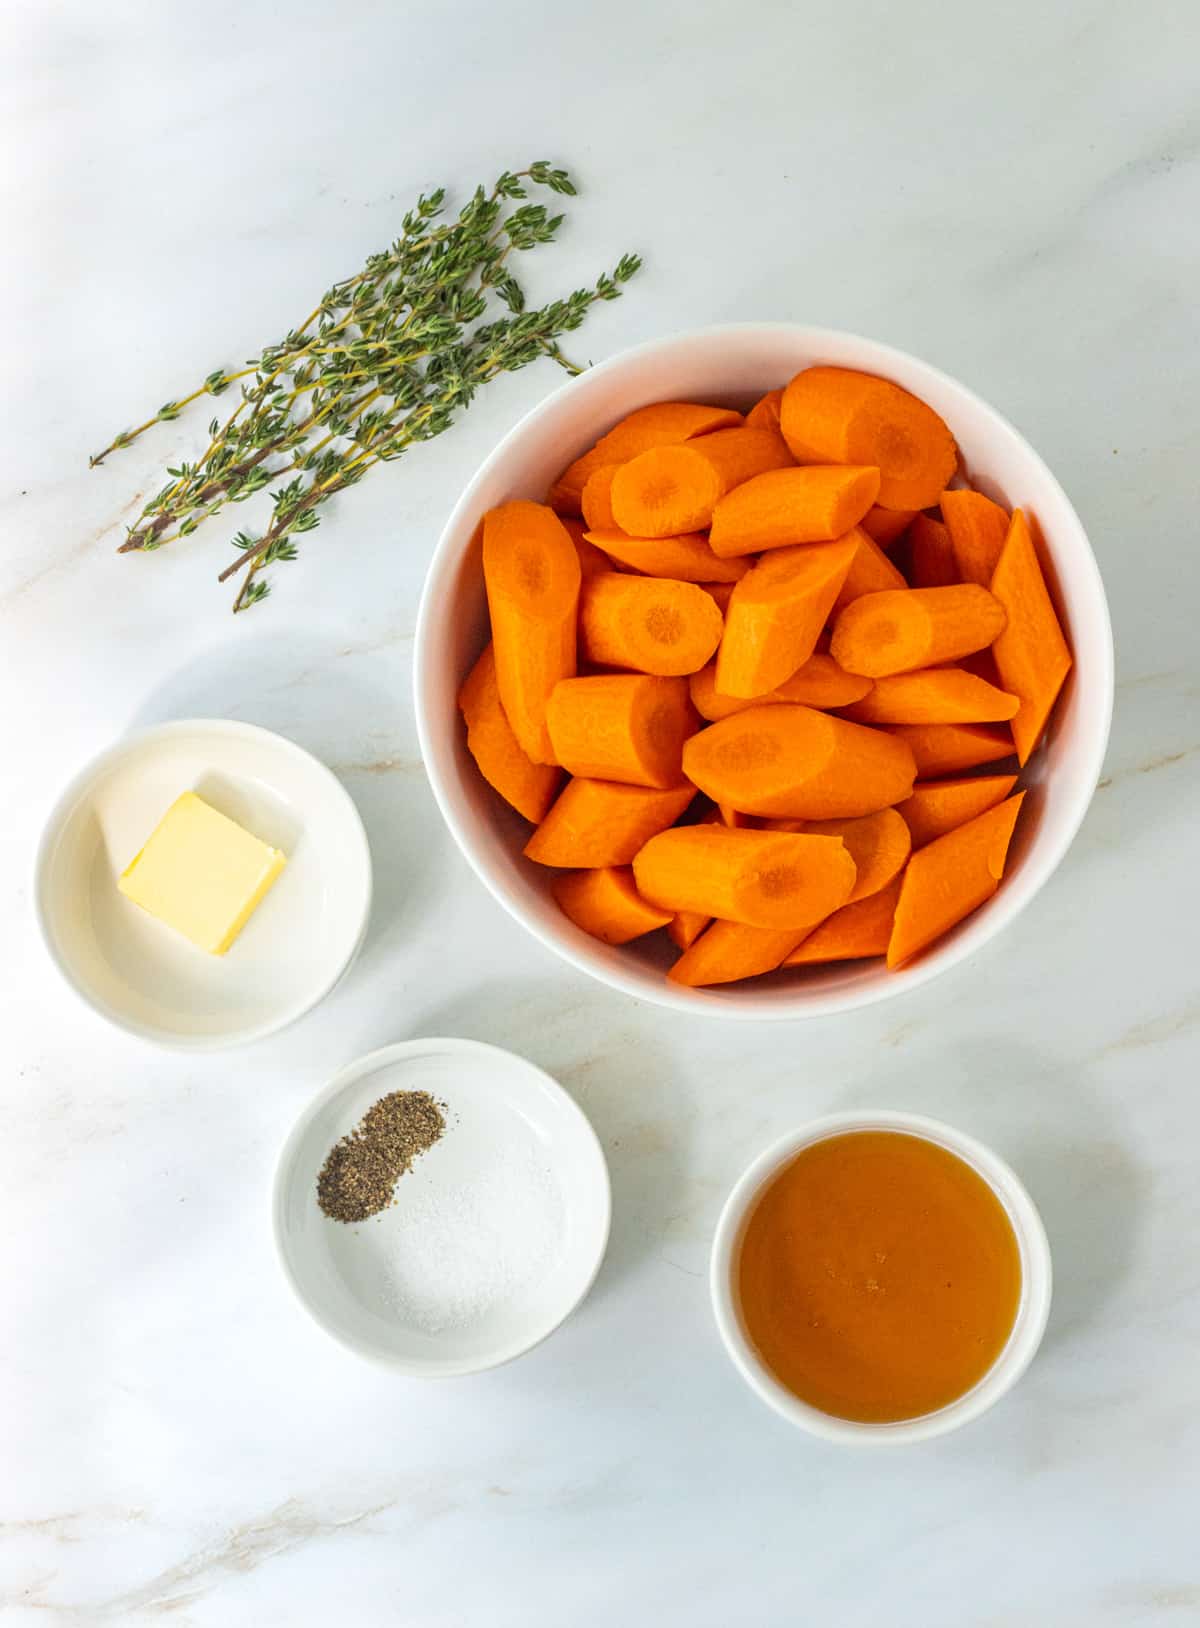 Ingredients for honey thyme roasted carrots.